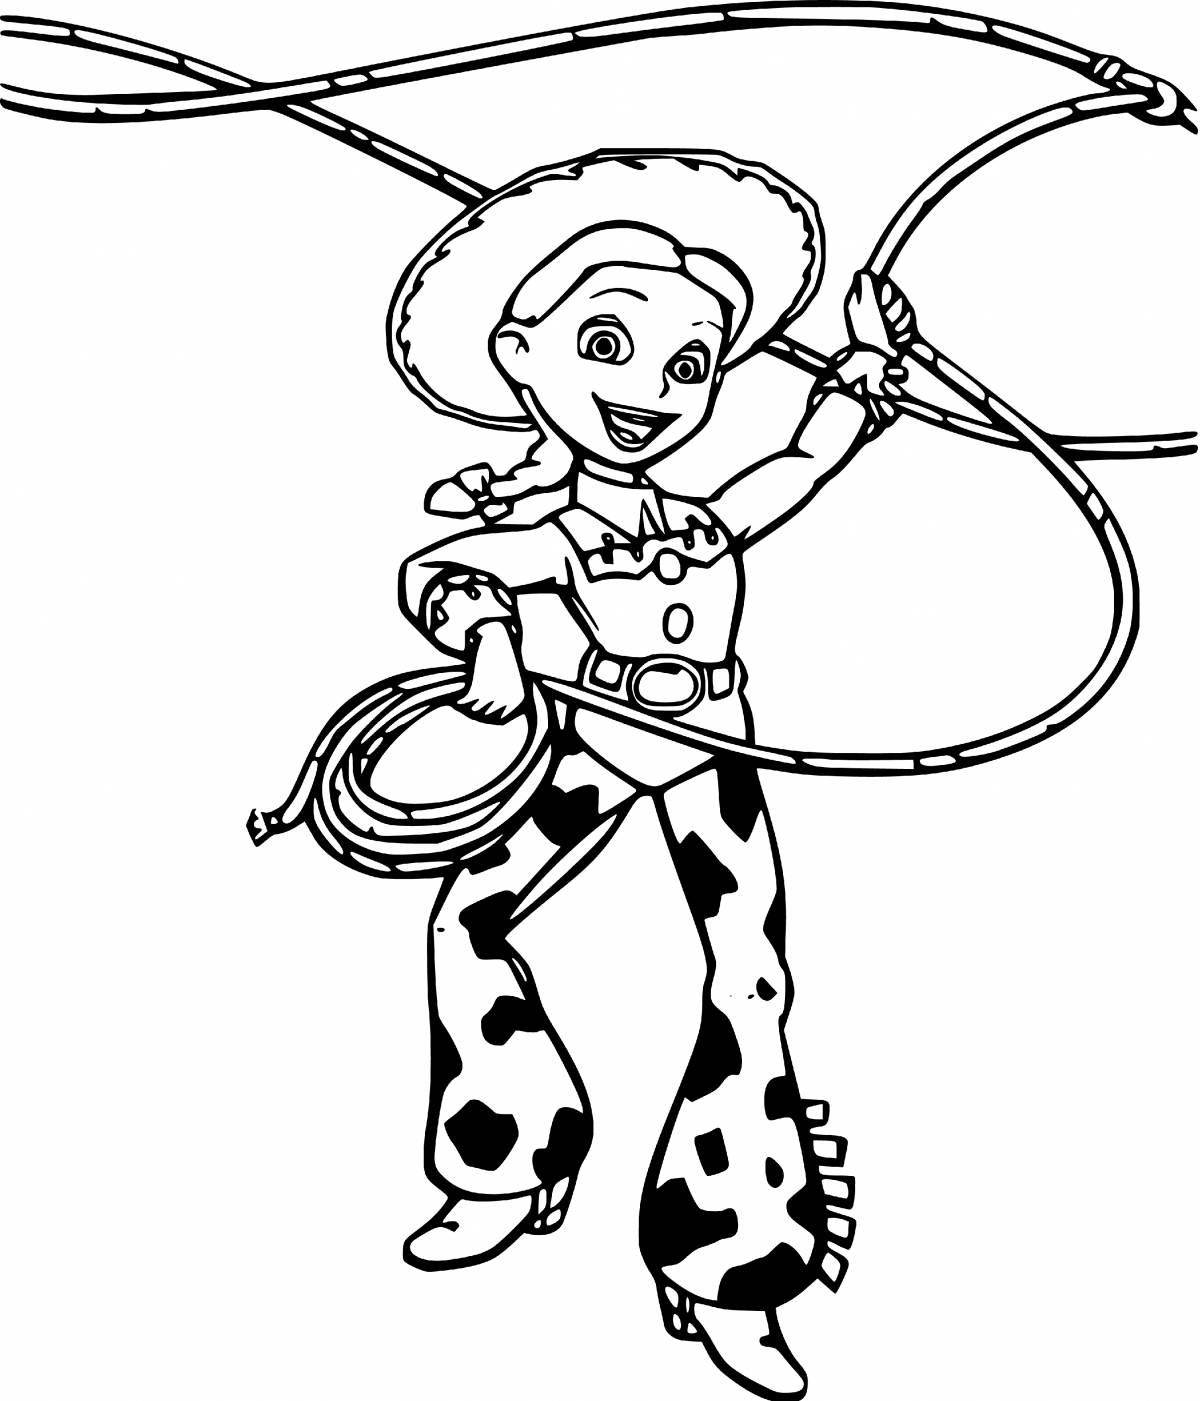 Jessie's Amazing Toy Story Coloring Page